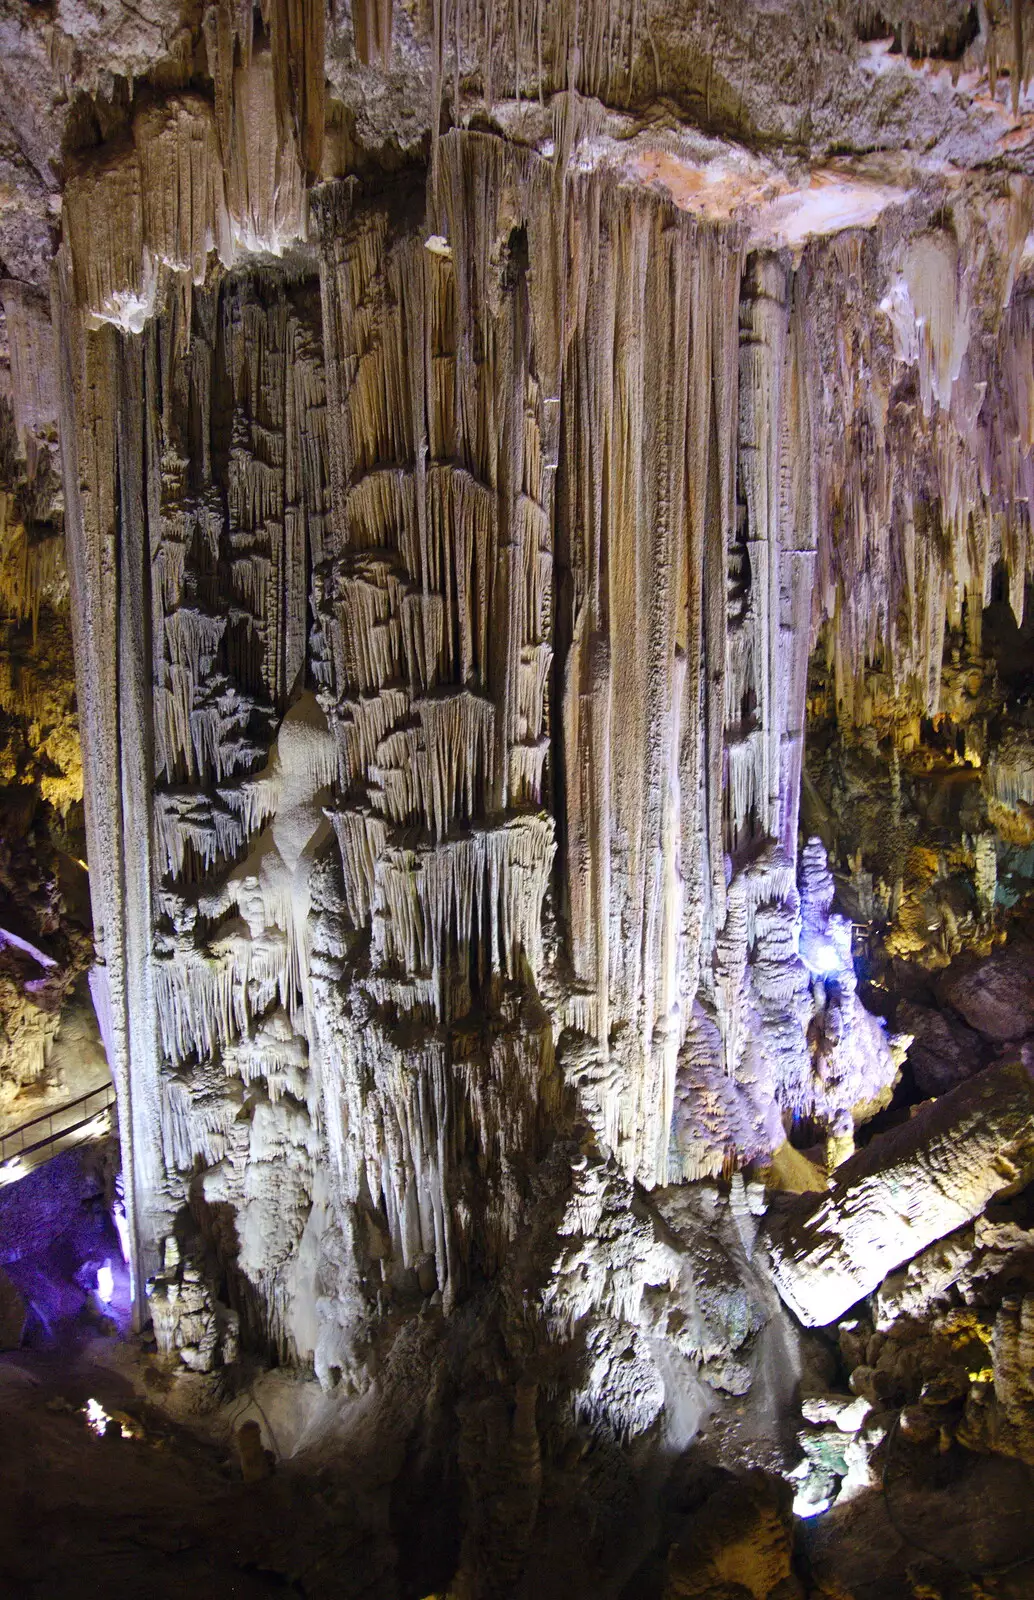 An impressive column in the caves, from The Caves of Nerja, and Frigiliana, Andalusia, Spain - 18th April 2019